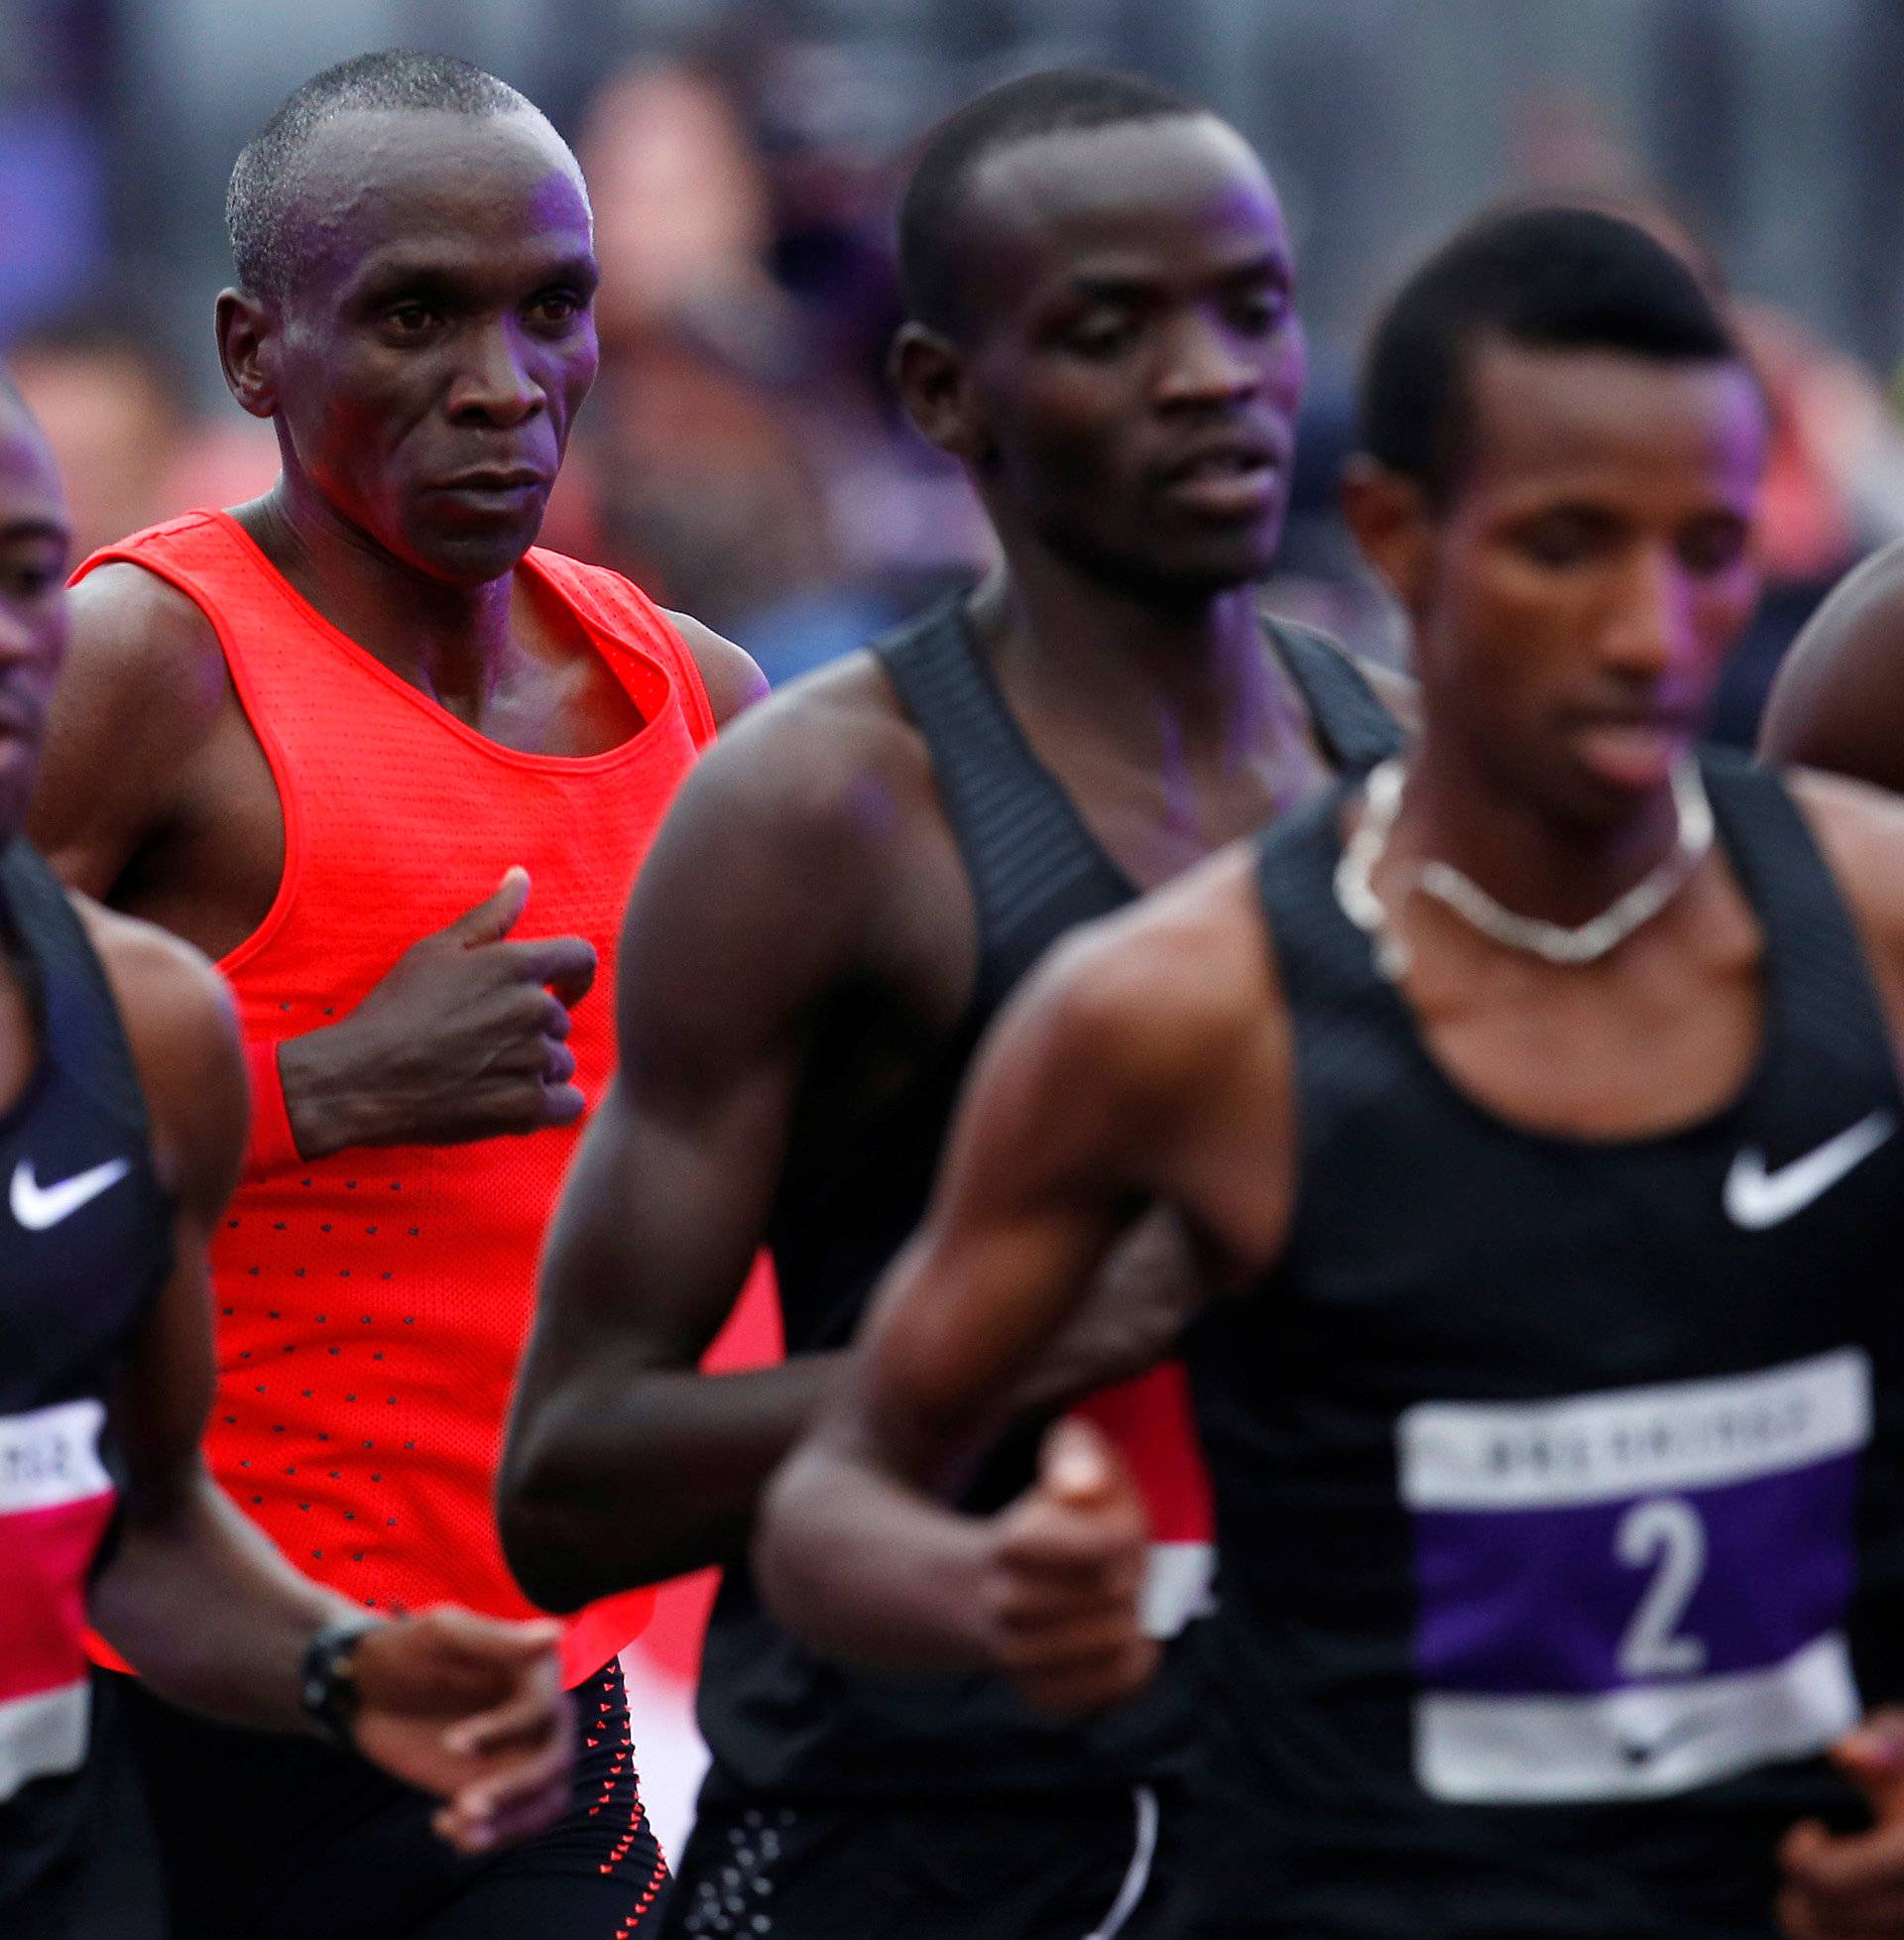 Kipchoge runs behind pace-makers during an attempt to break the two-hour marathon barrier at the Monza circuit.